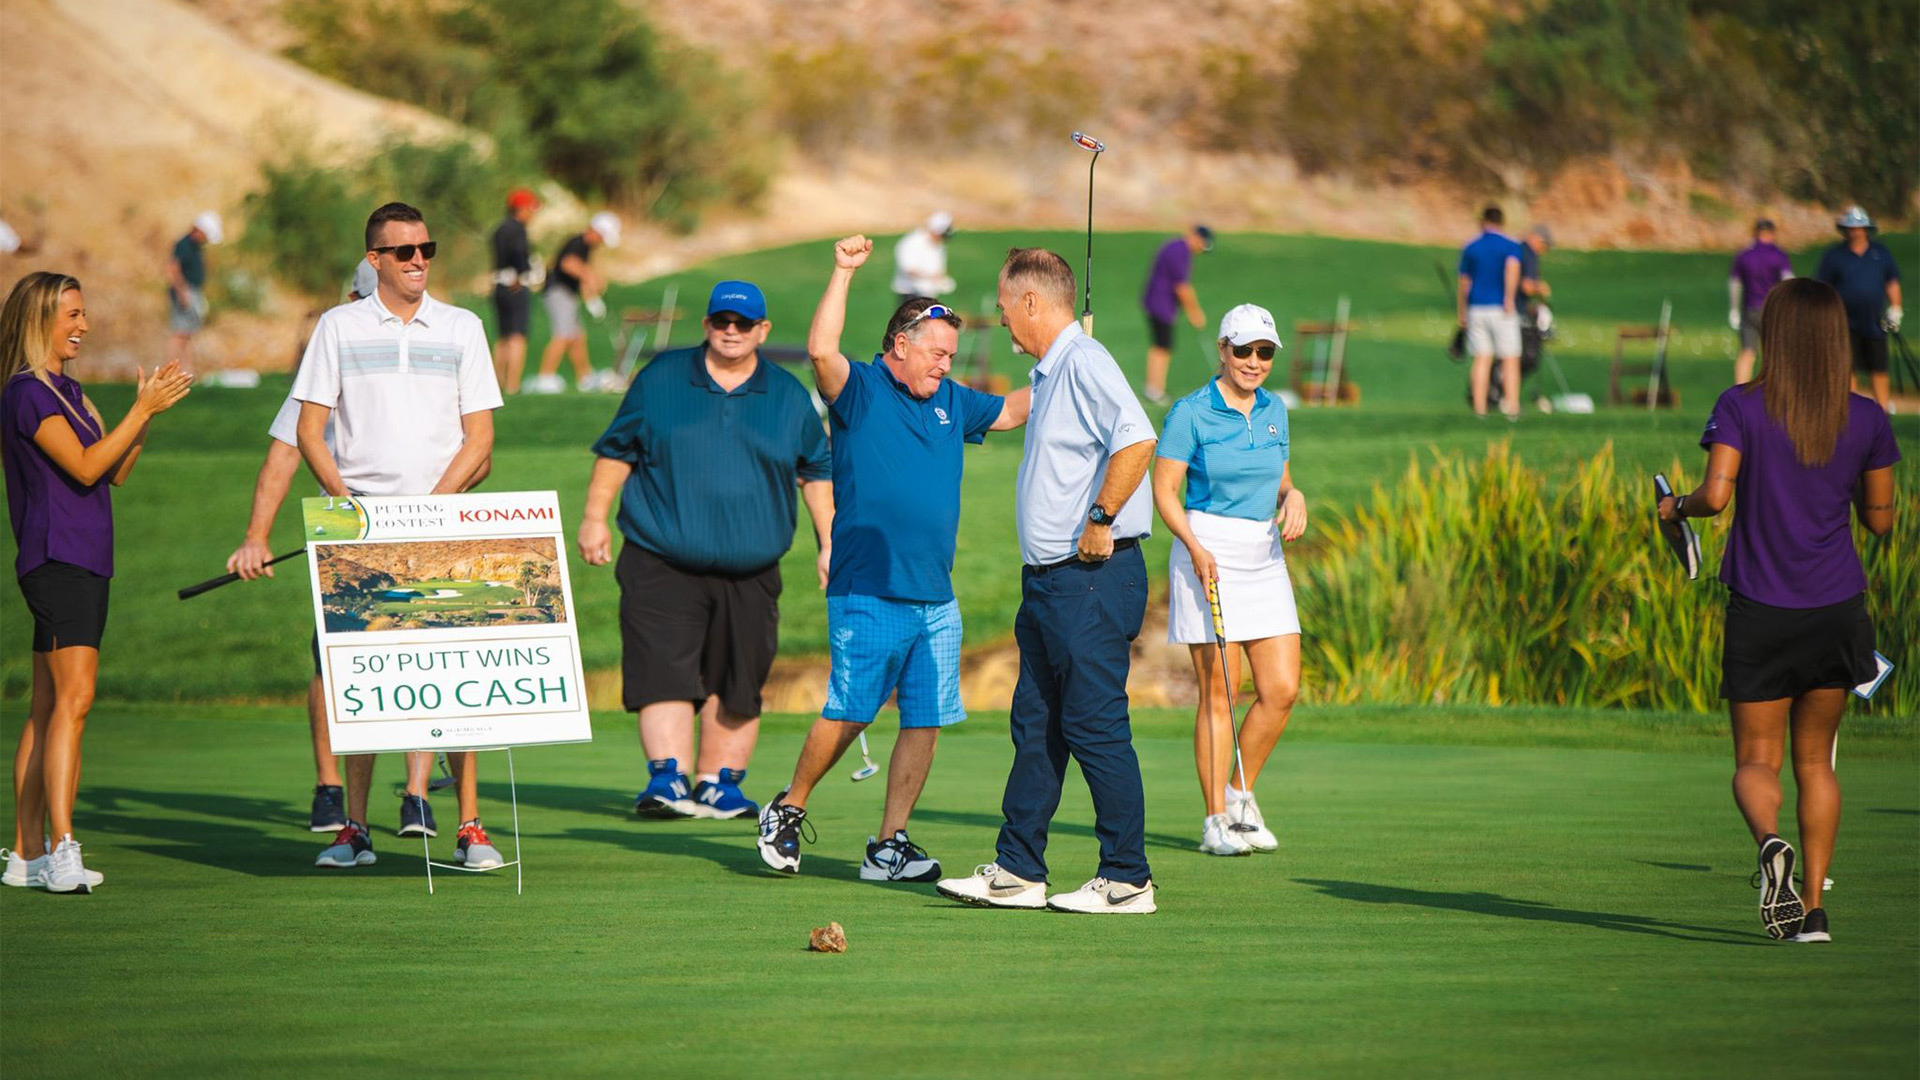 AGEM & AGA Golf Classic fundraising event for ICRG to be held May 11 in Nevada